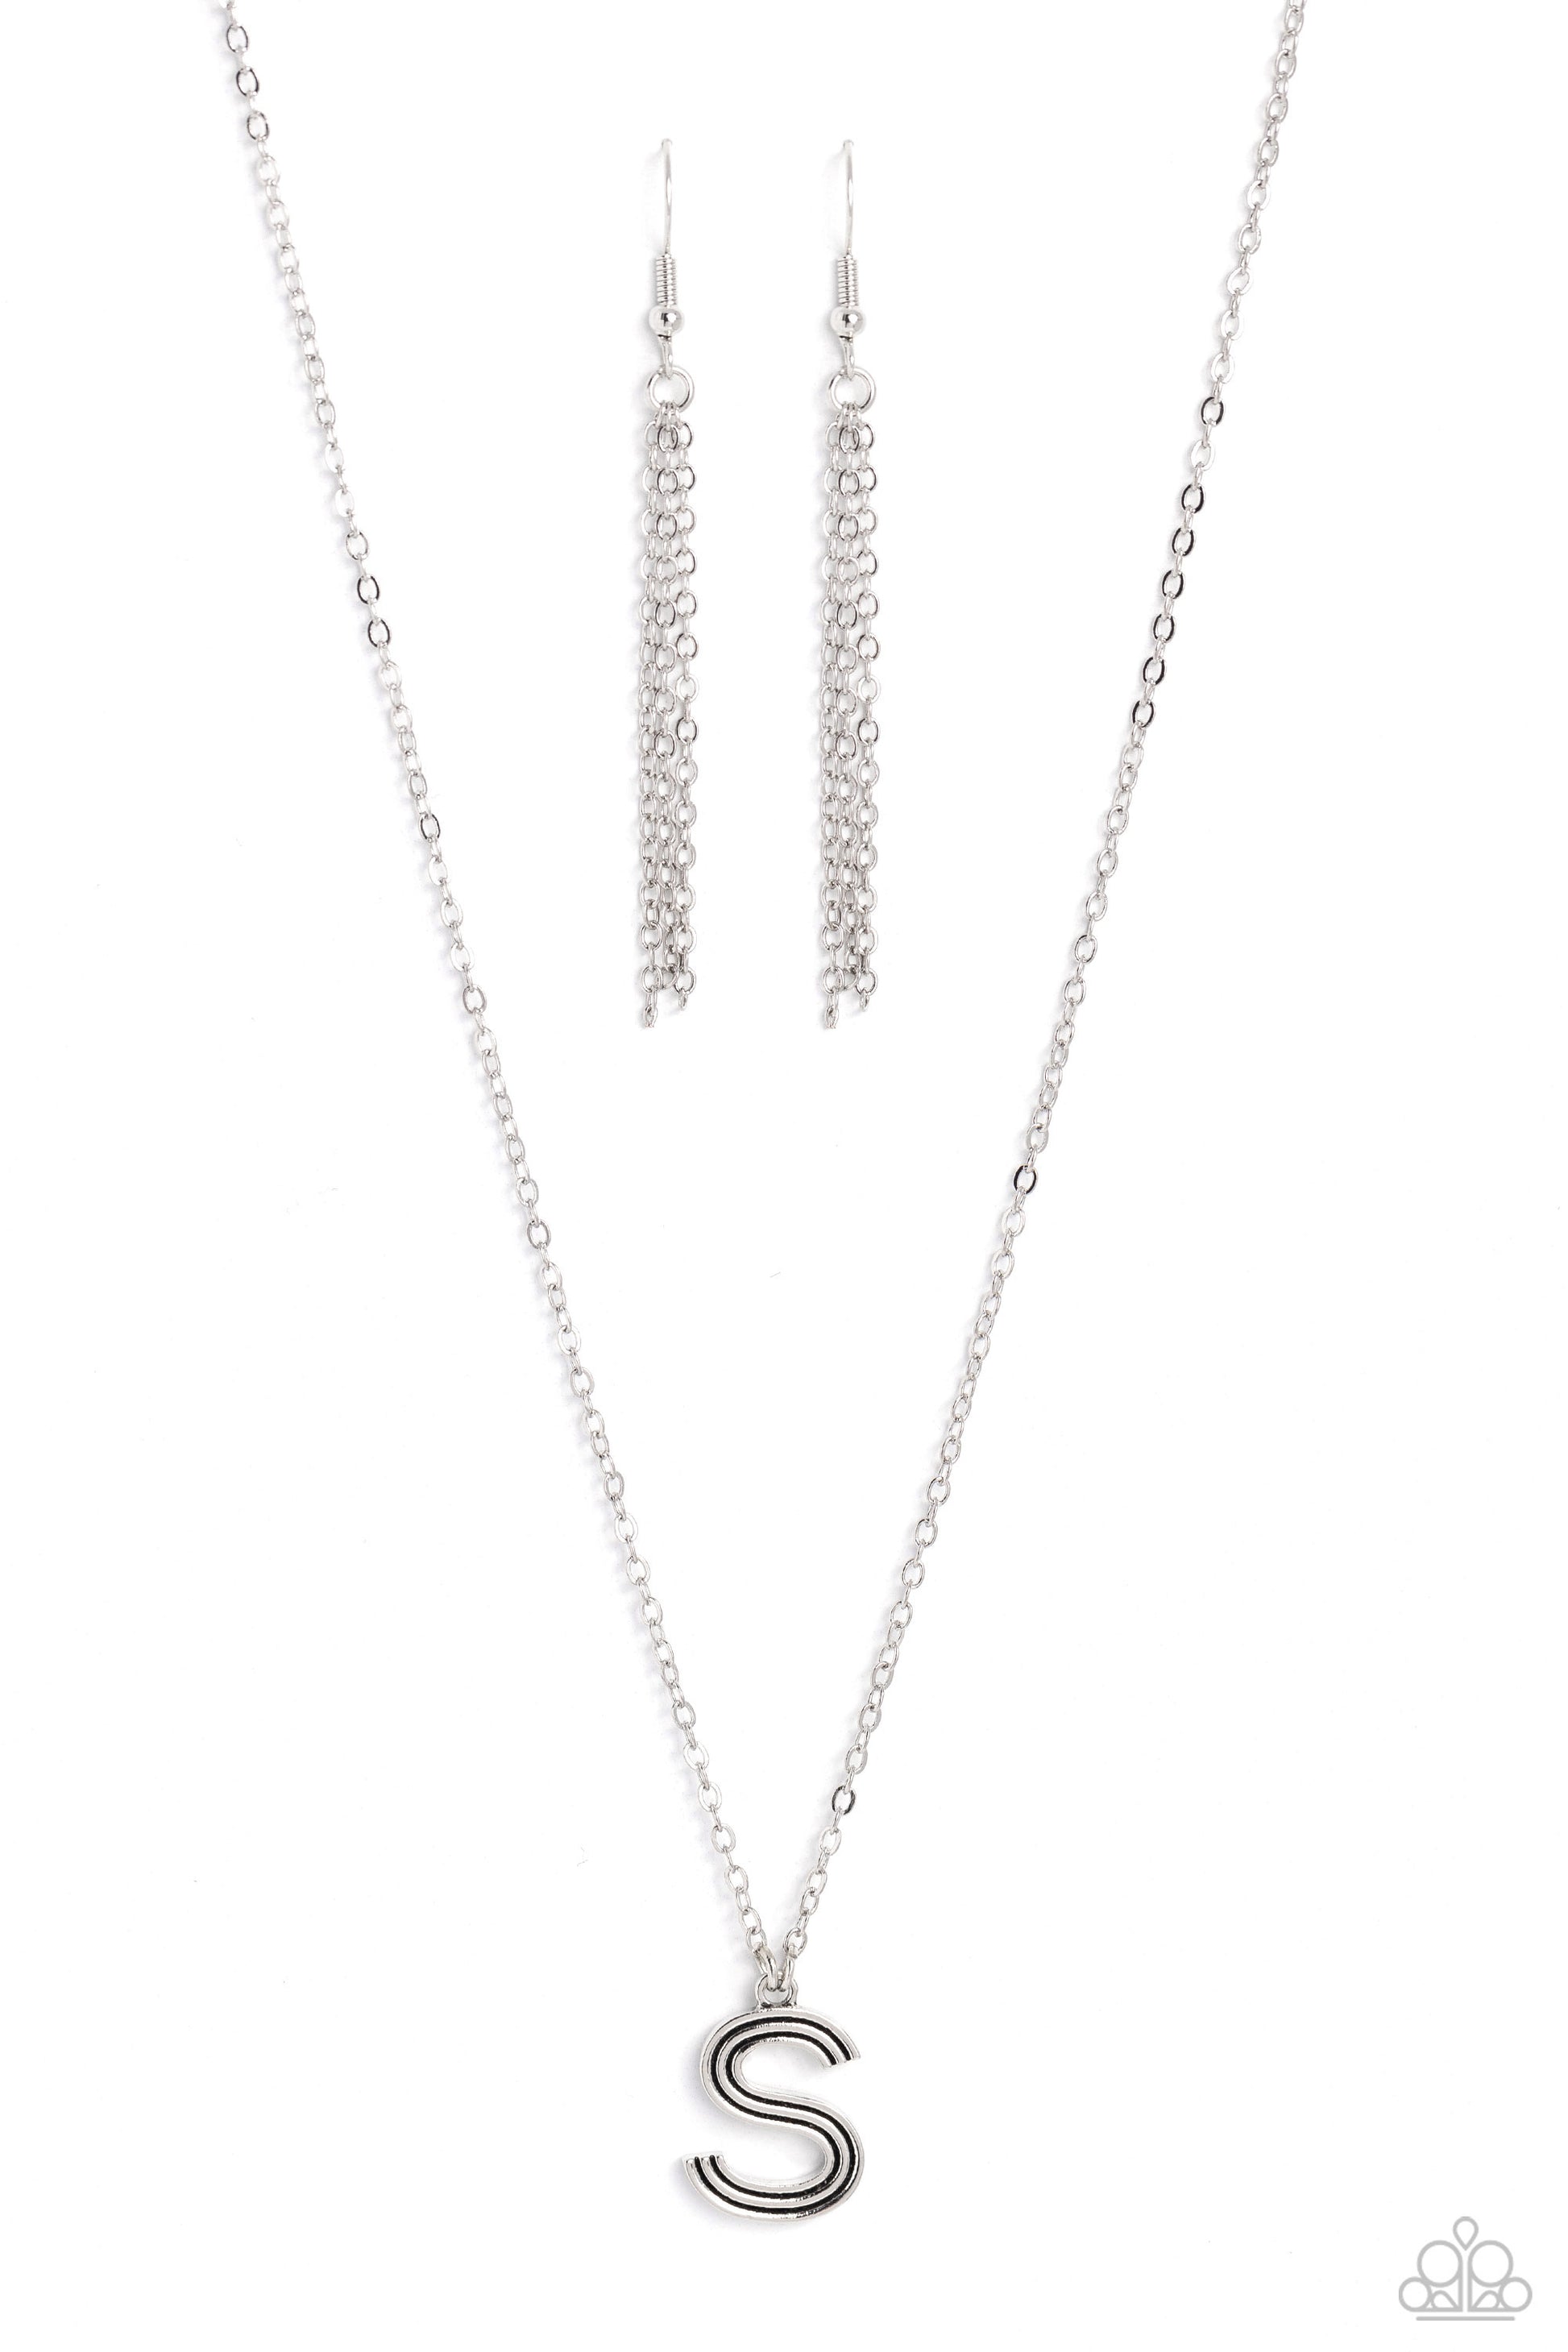 Leave Your Initials - silver - S - Paparazzi necklace